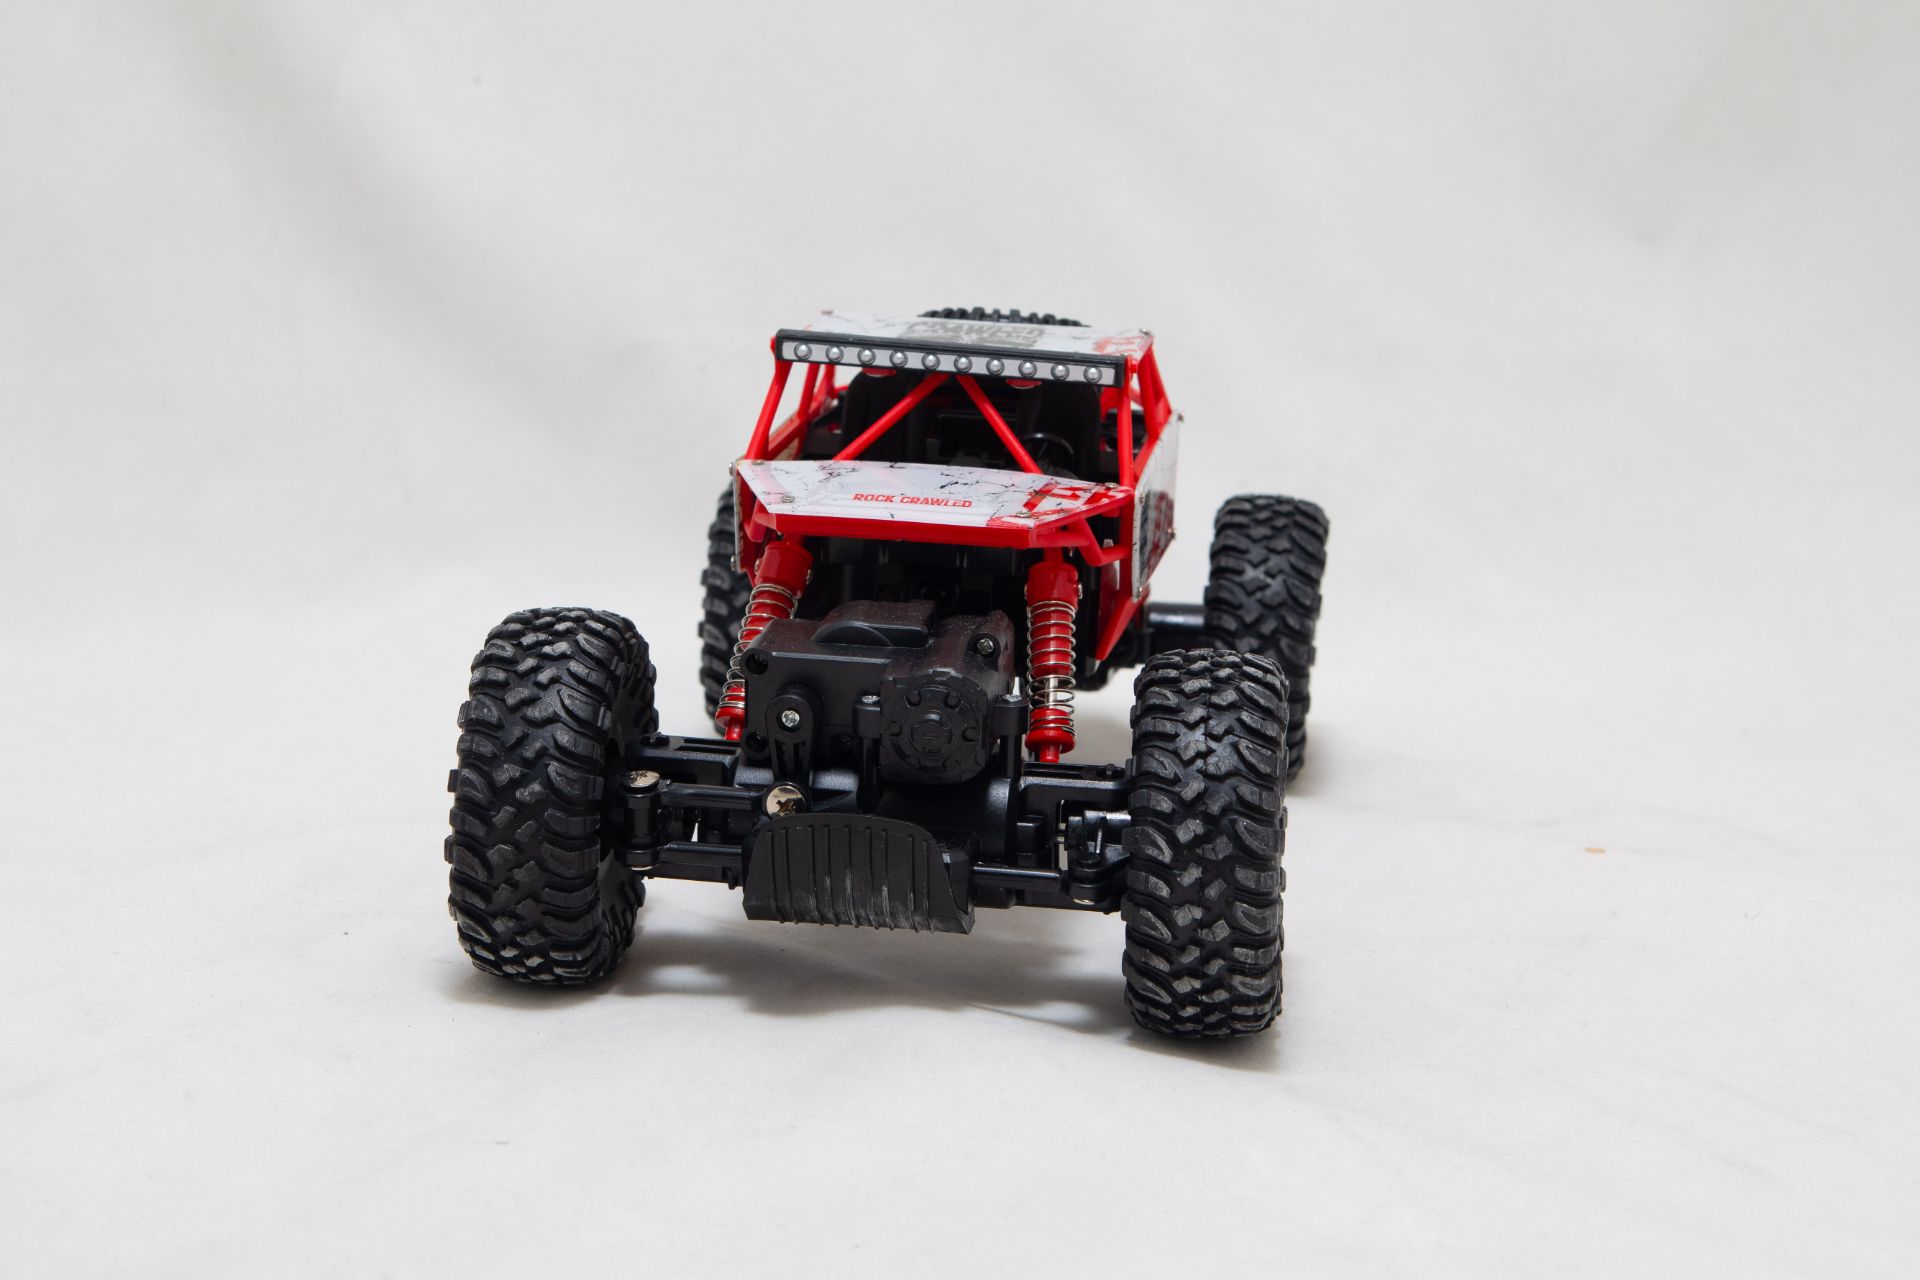 36 X ROCK CRAWLER - REMOTE CONTROL OFF ROAD TRUCK - Image 6 of 9